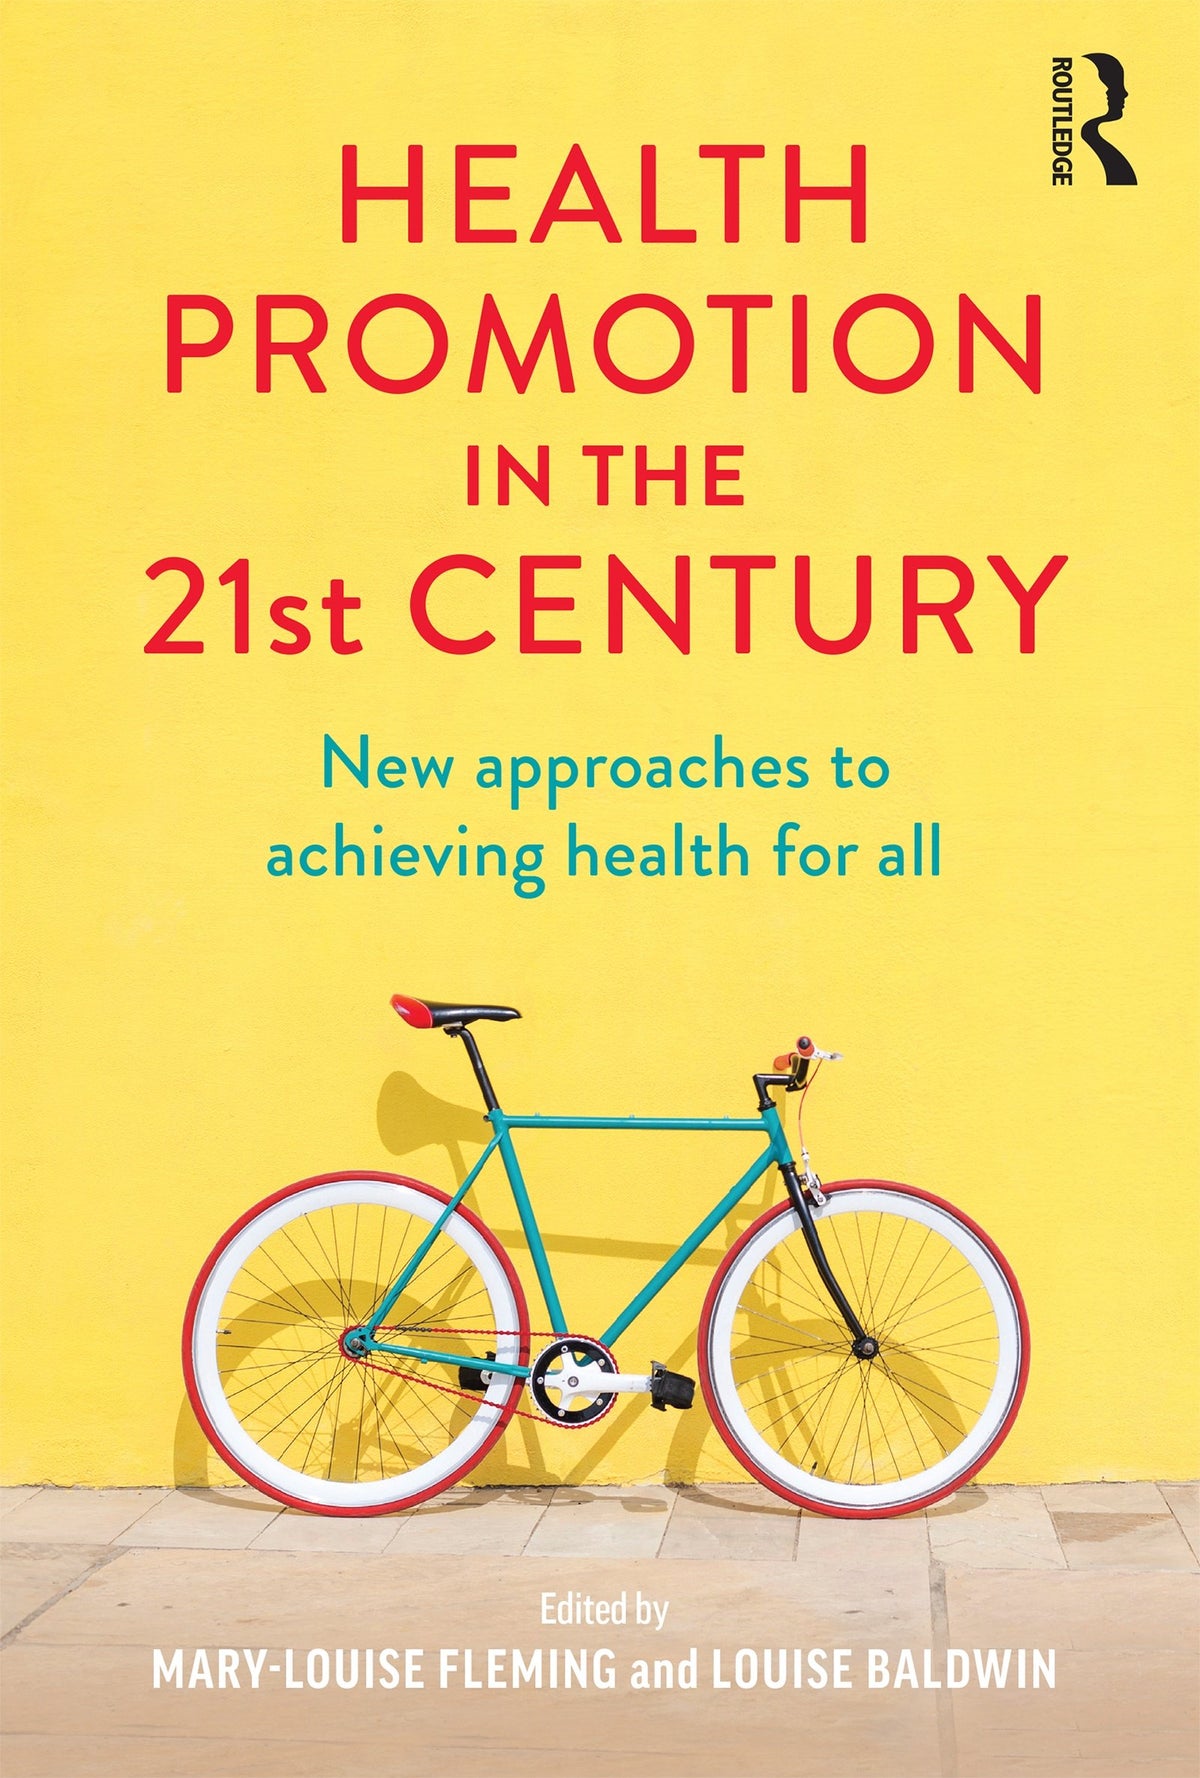 HEALTH PROMOTION IN THE 21ST CENTURY eBOOK